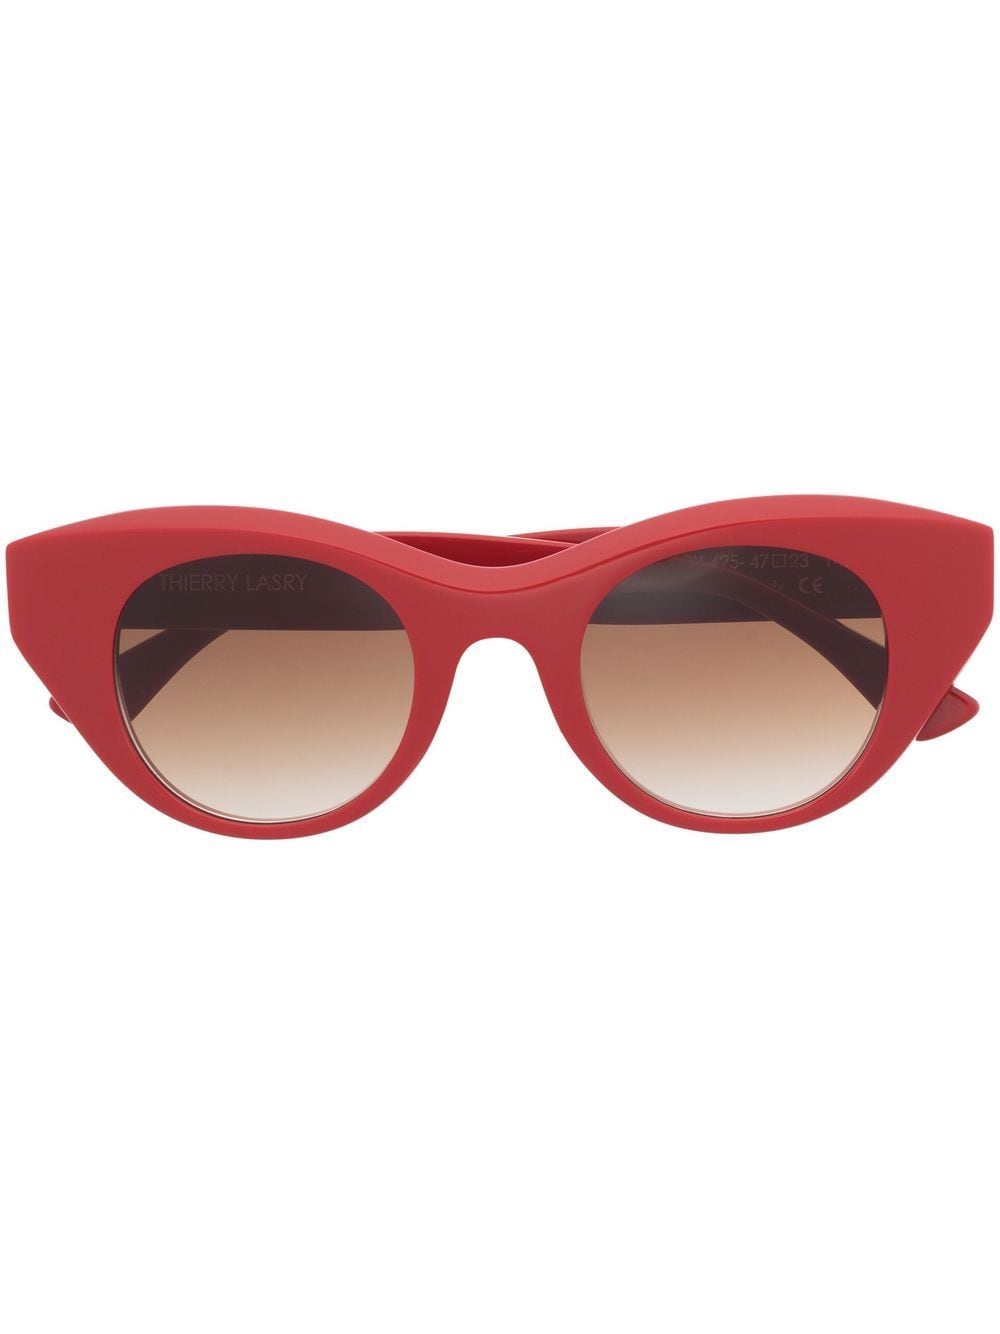 Thierry Lasry cat-eye frame sunglasses - Red von Thierry Lasry